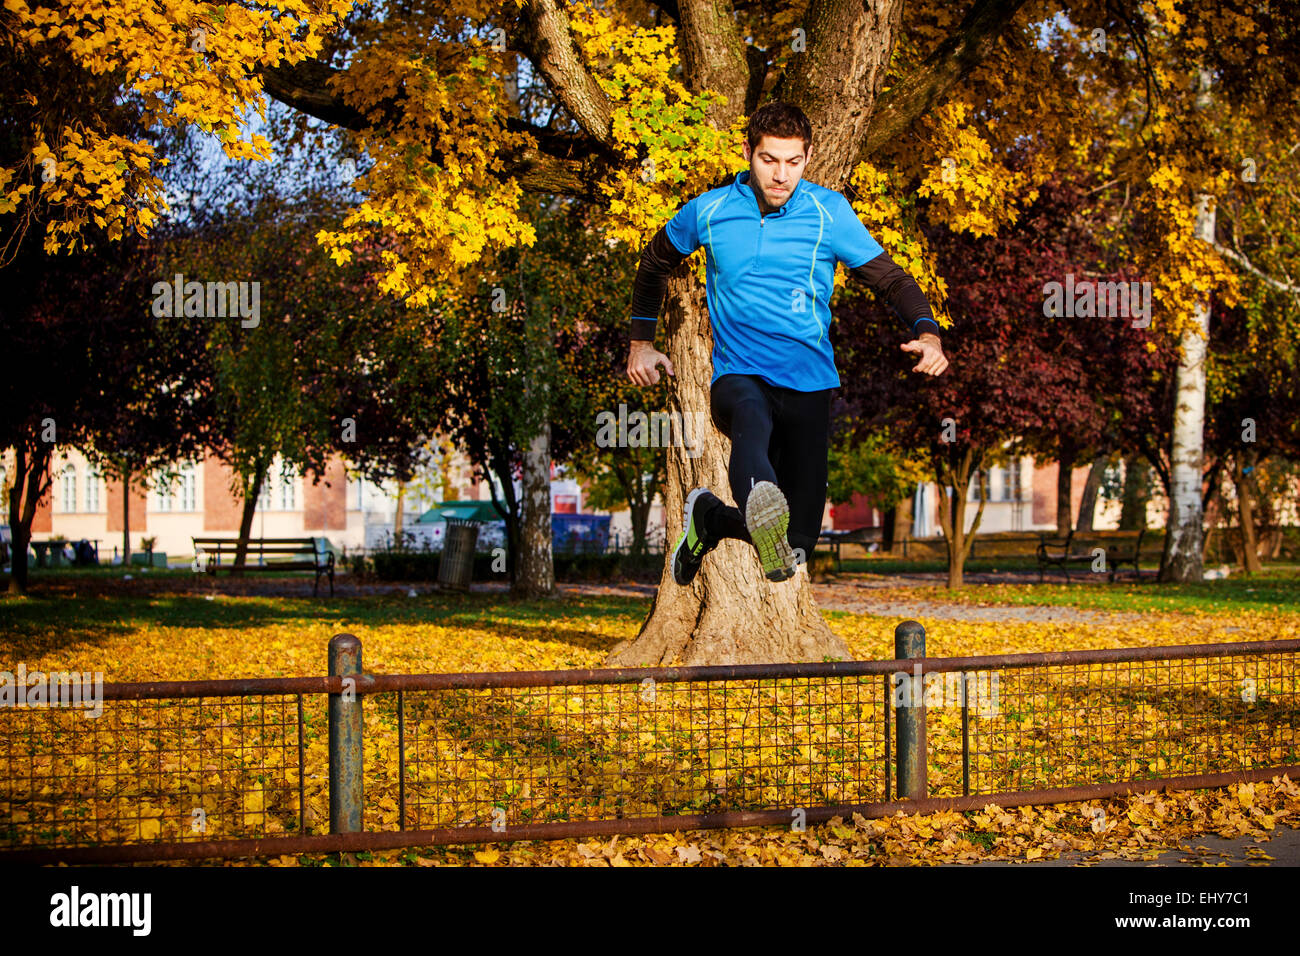 Male runner jumping over fence in autumn park Stock Photo